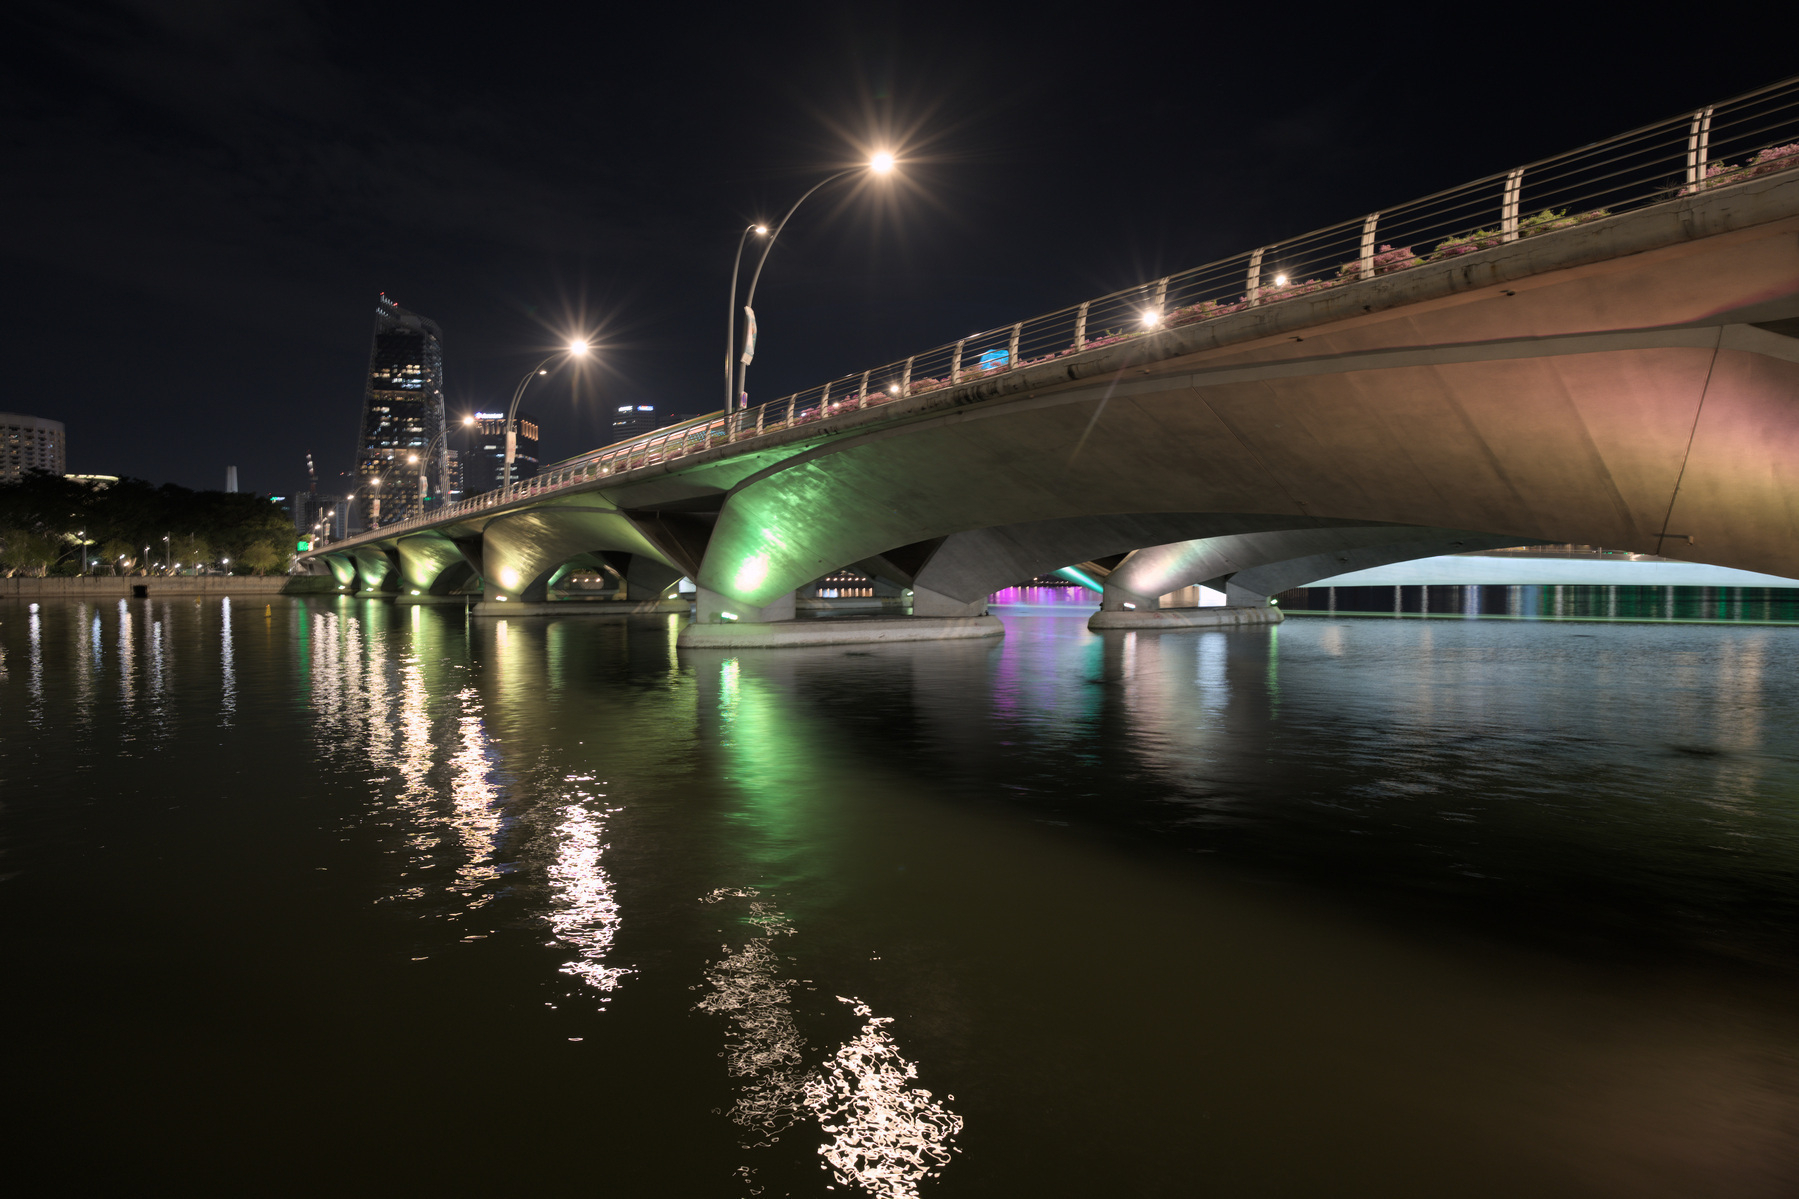 A bridge across the water of the Singapore river. The water is choppier from the shorter exposure time.